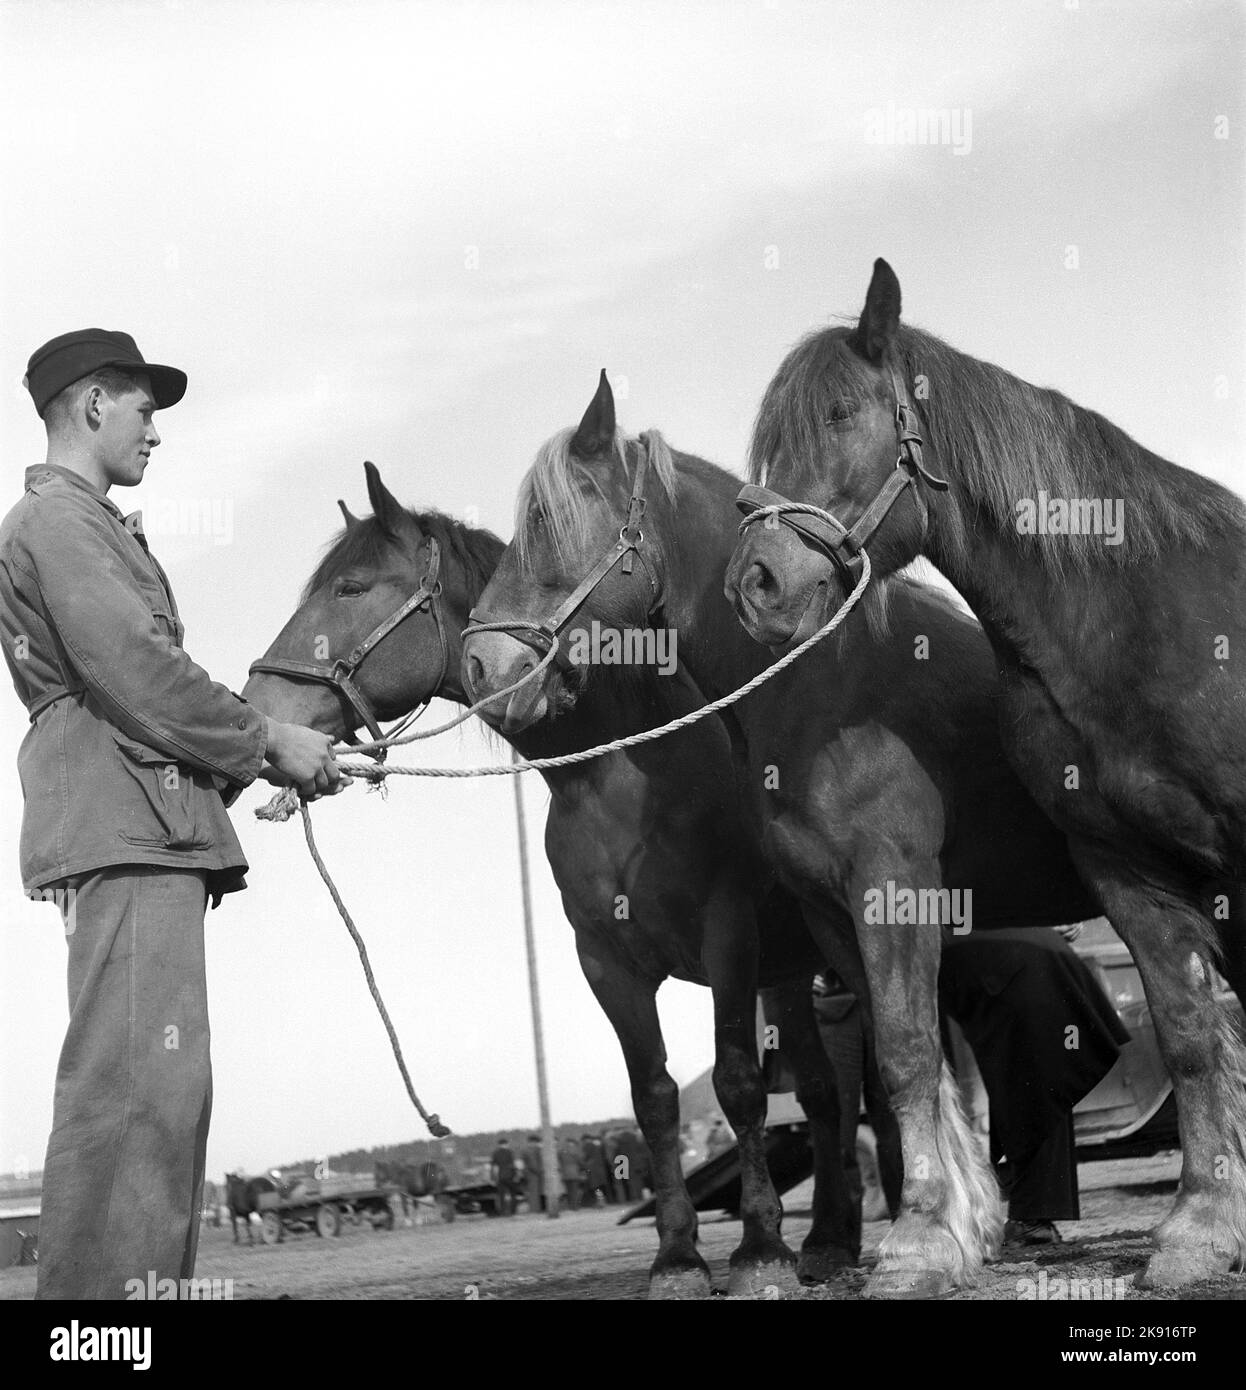 In the 1940s. A young man with three horses at a horse market in the town Hjo in Sweden 1942. At this time horses were still used in transportation and farming and at the horse markets, horses were sold and bought. Kristoffersson ref AF26-7 Stock Photo